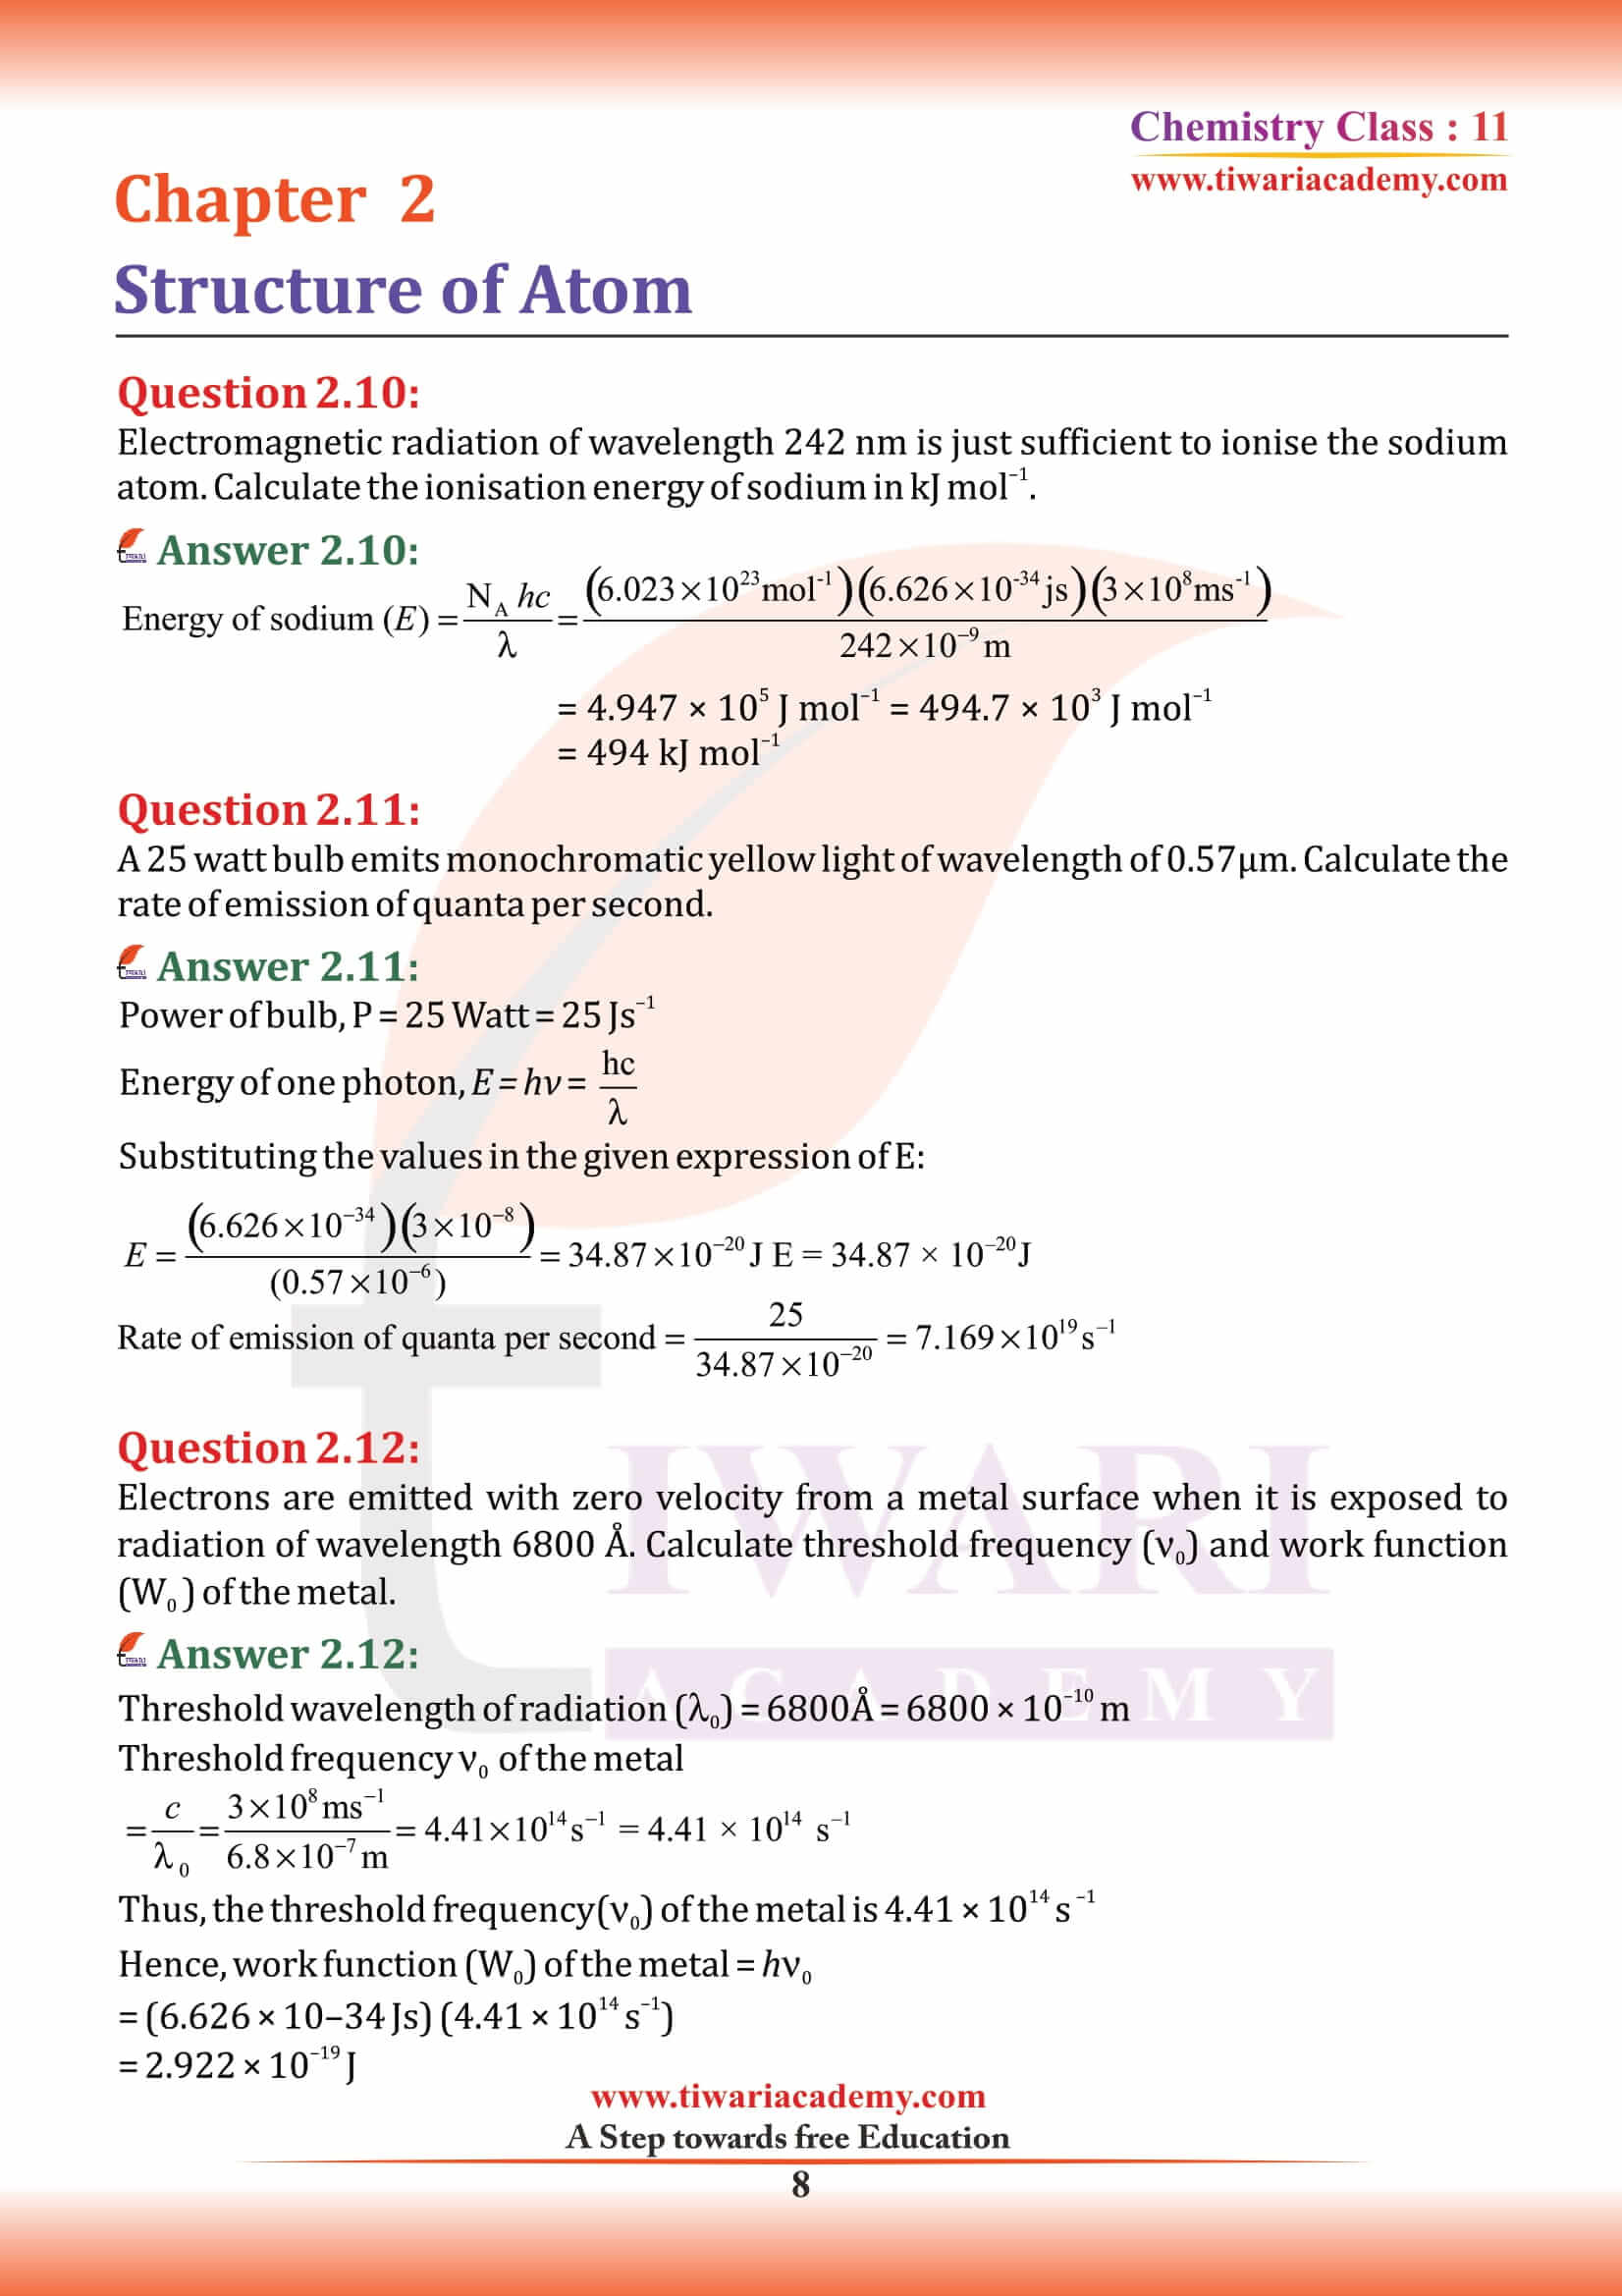 NCERT Solutions for Class 11 Chemistry Chapter 2 in English Medium